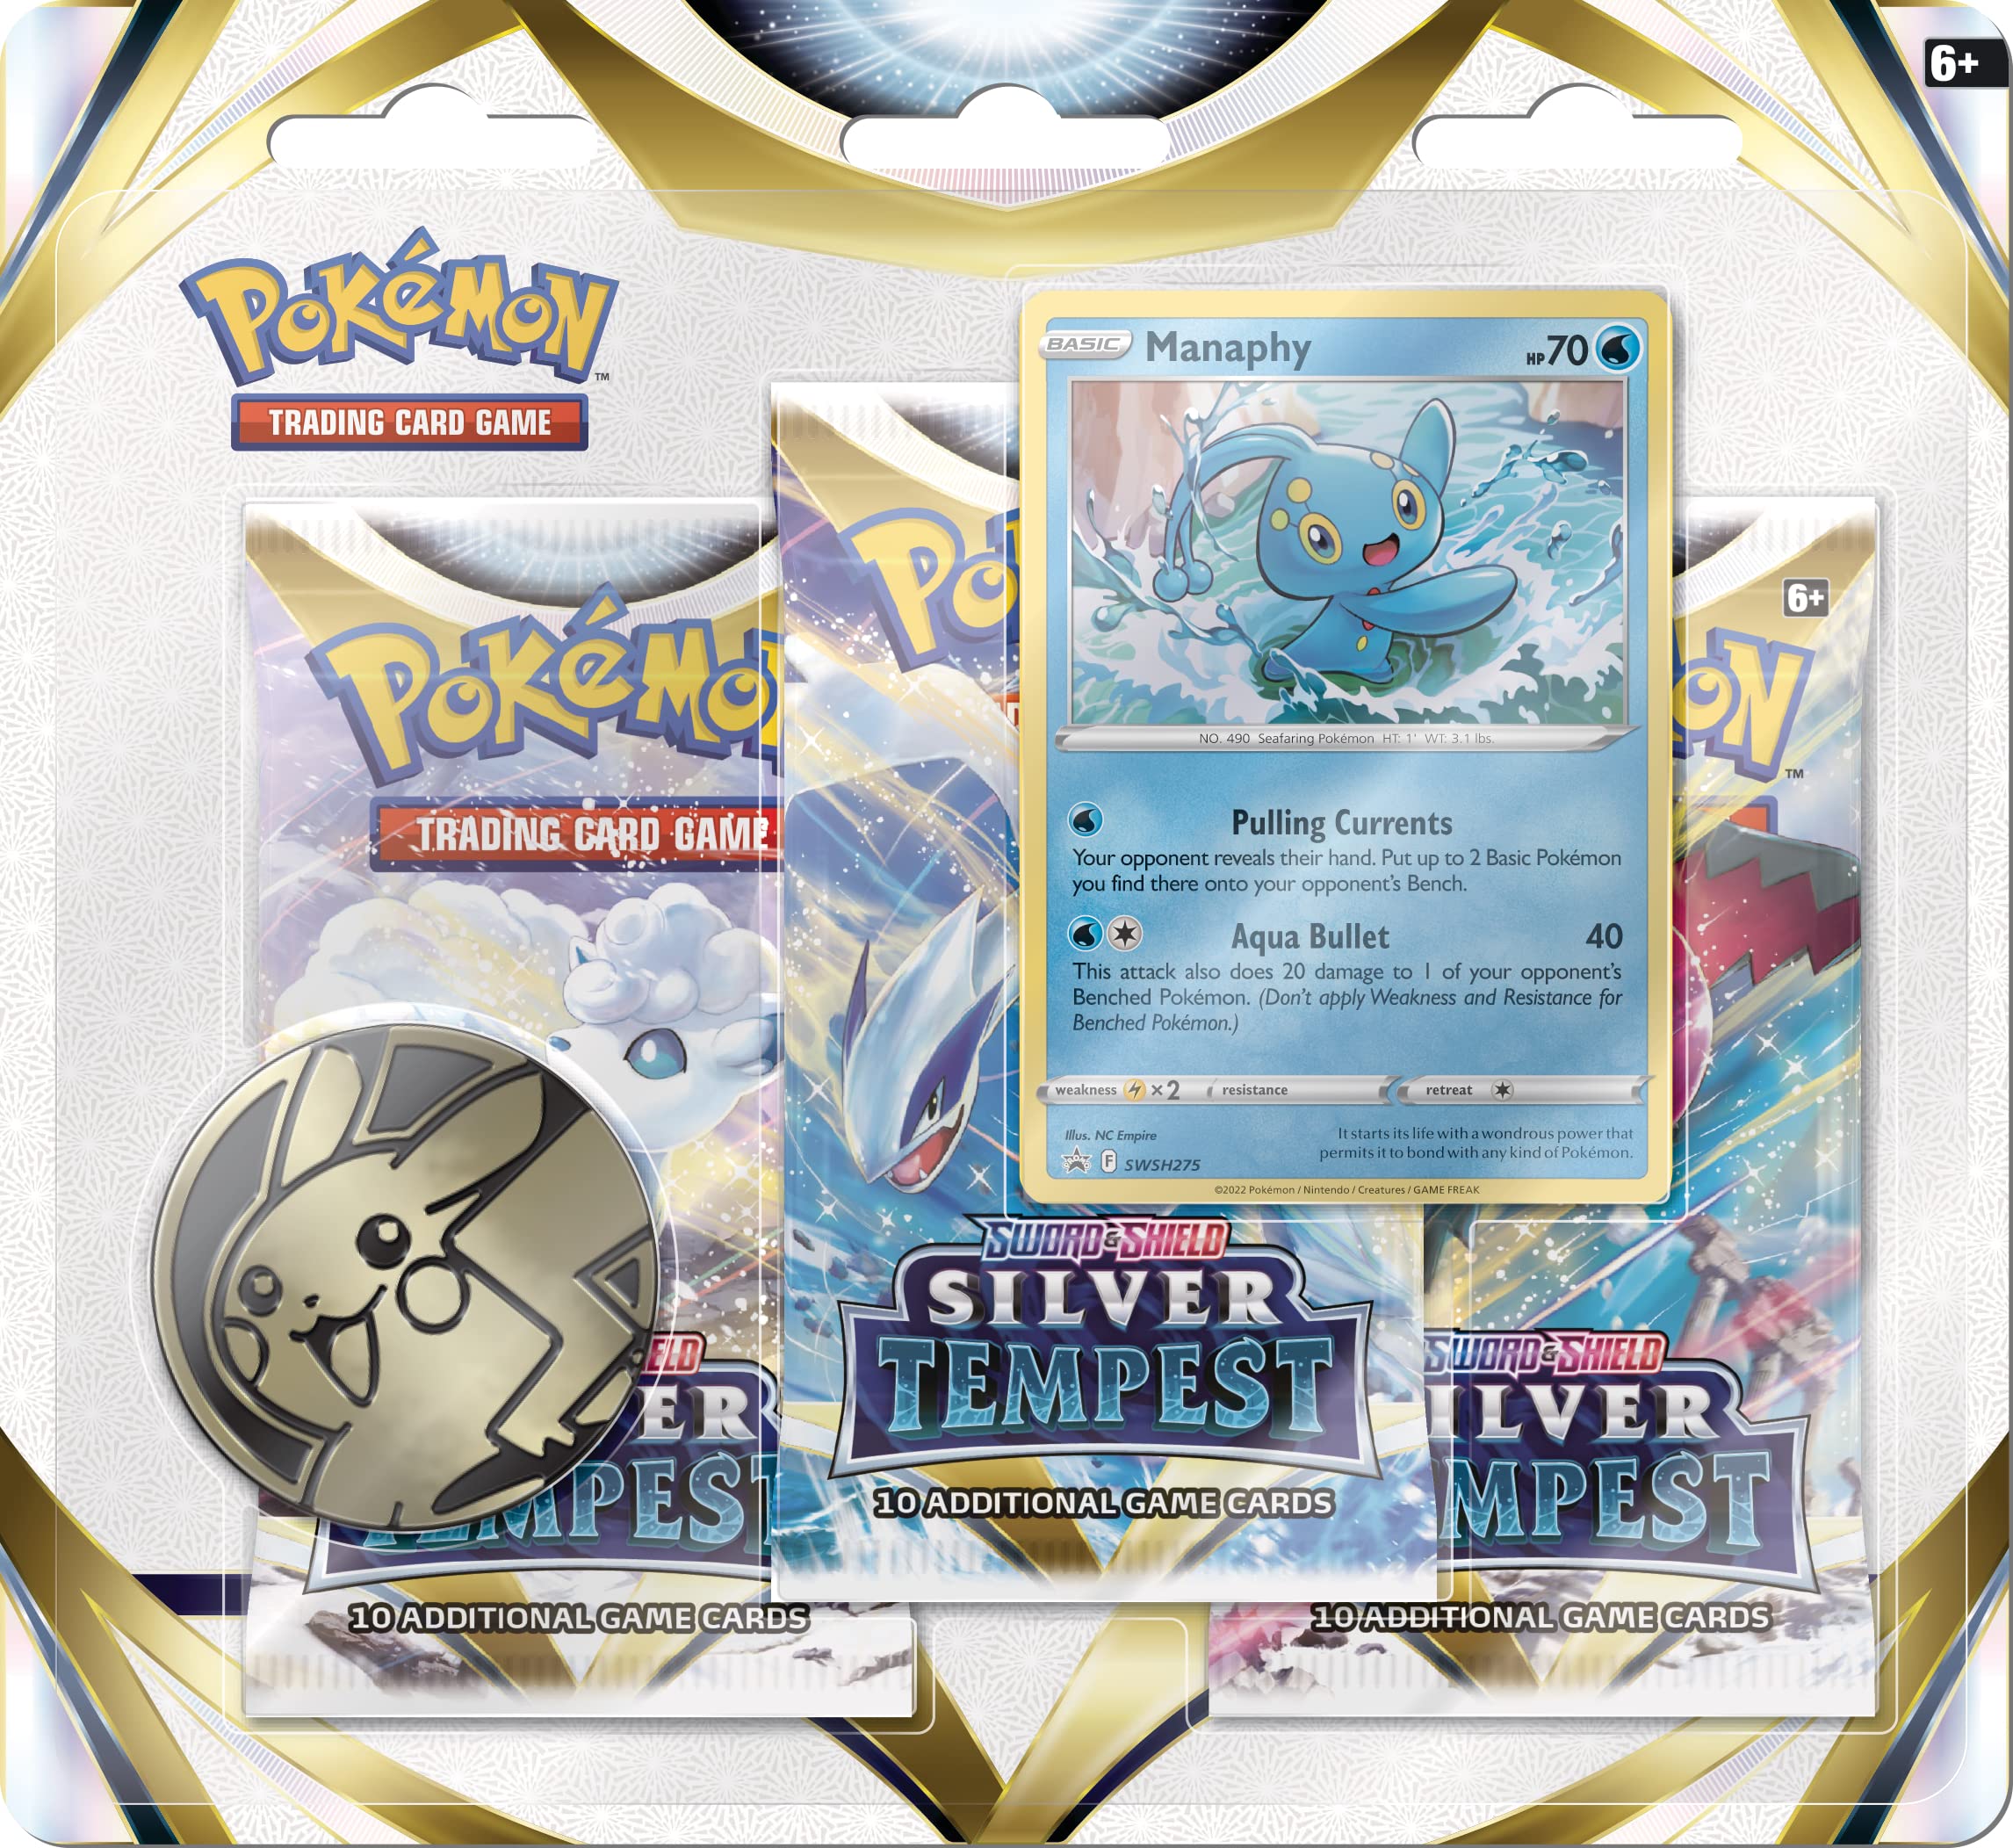 Pokémon Silver Tempest Triple Pack Manaphy Booster